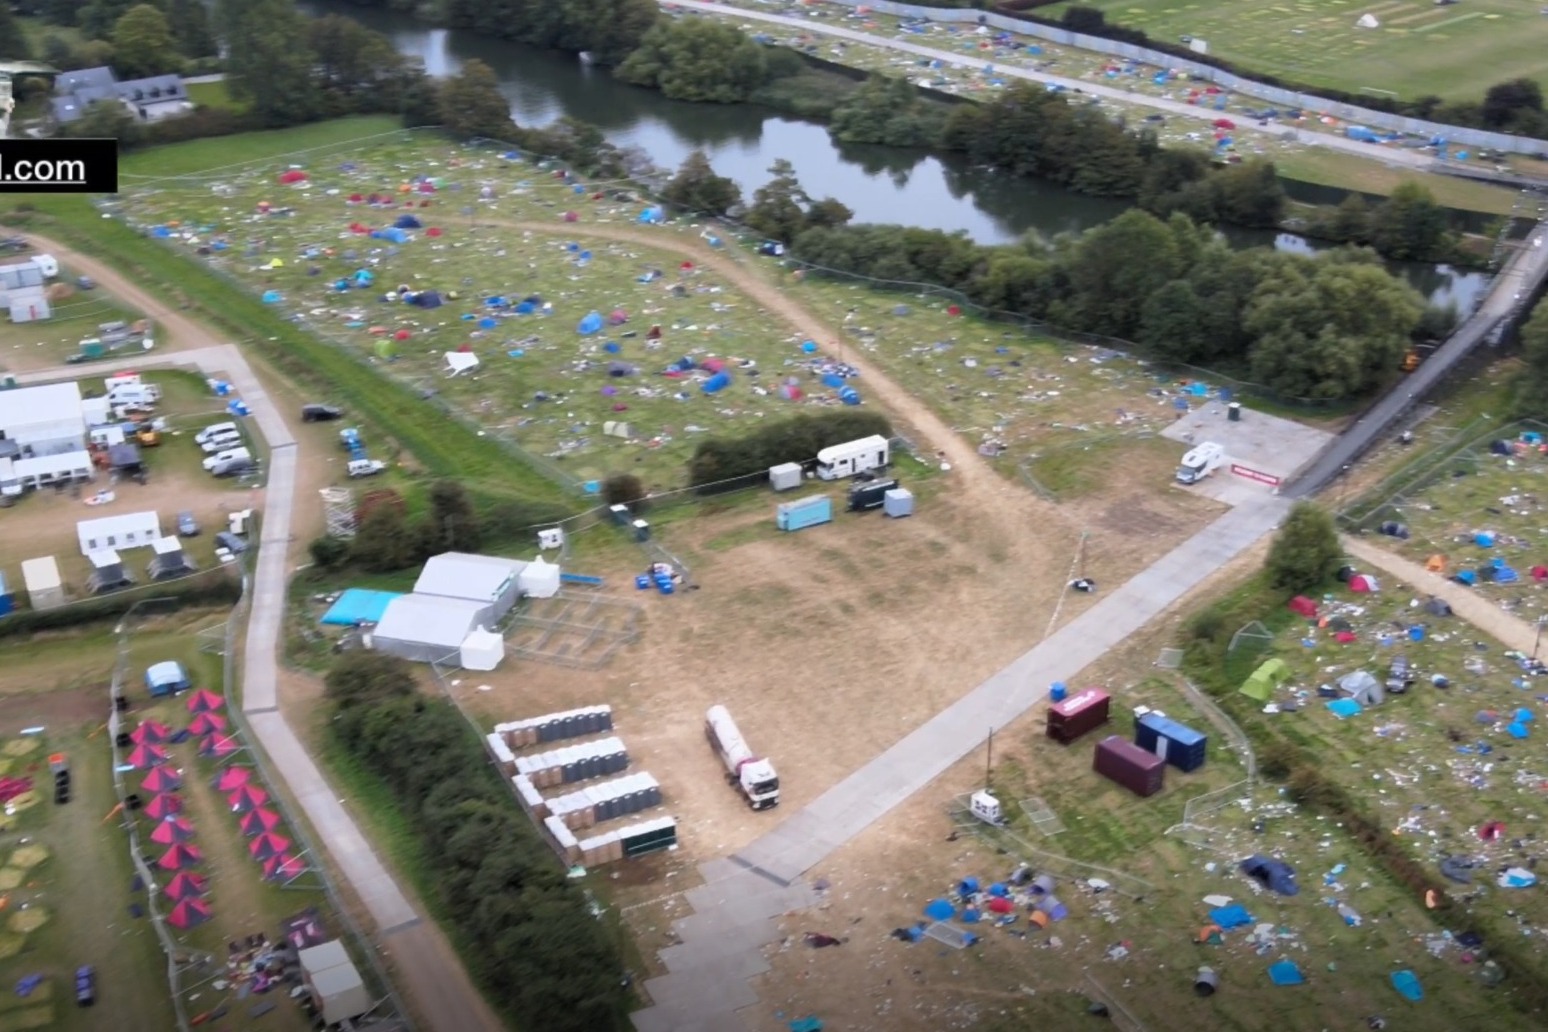 Clean-up operation begins after tents and rubbish left at Reading Festival 